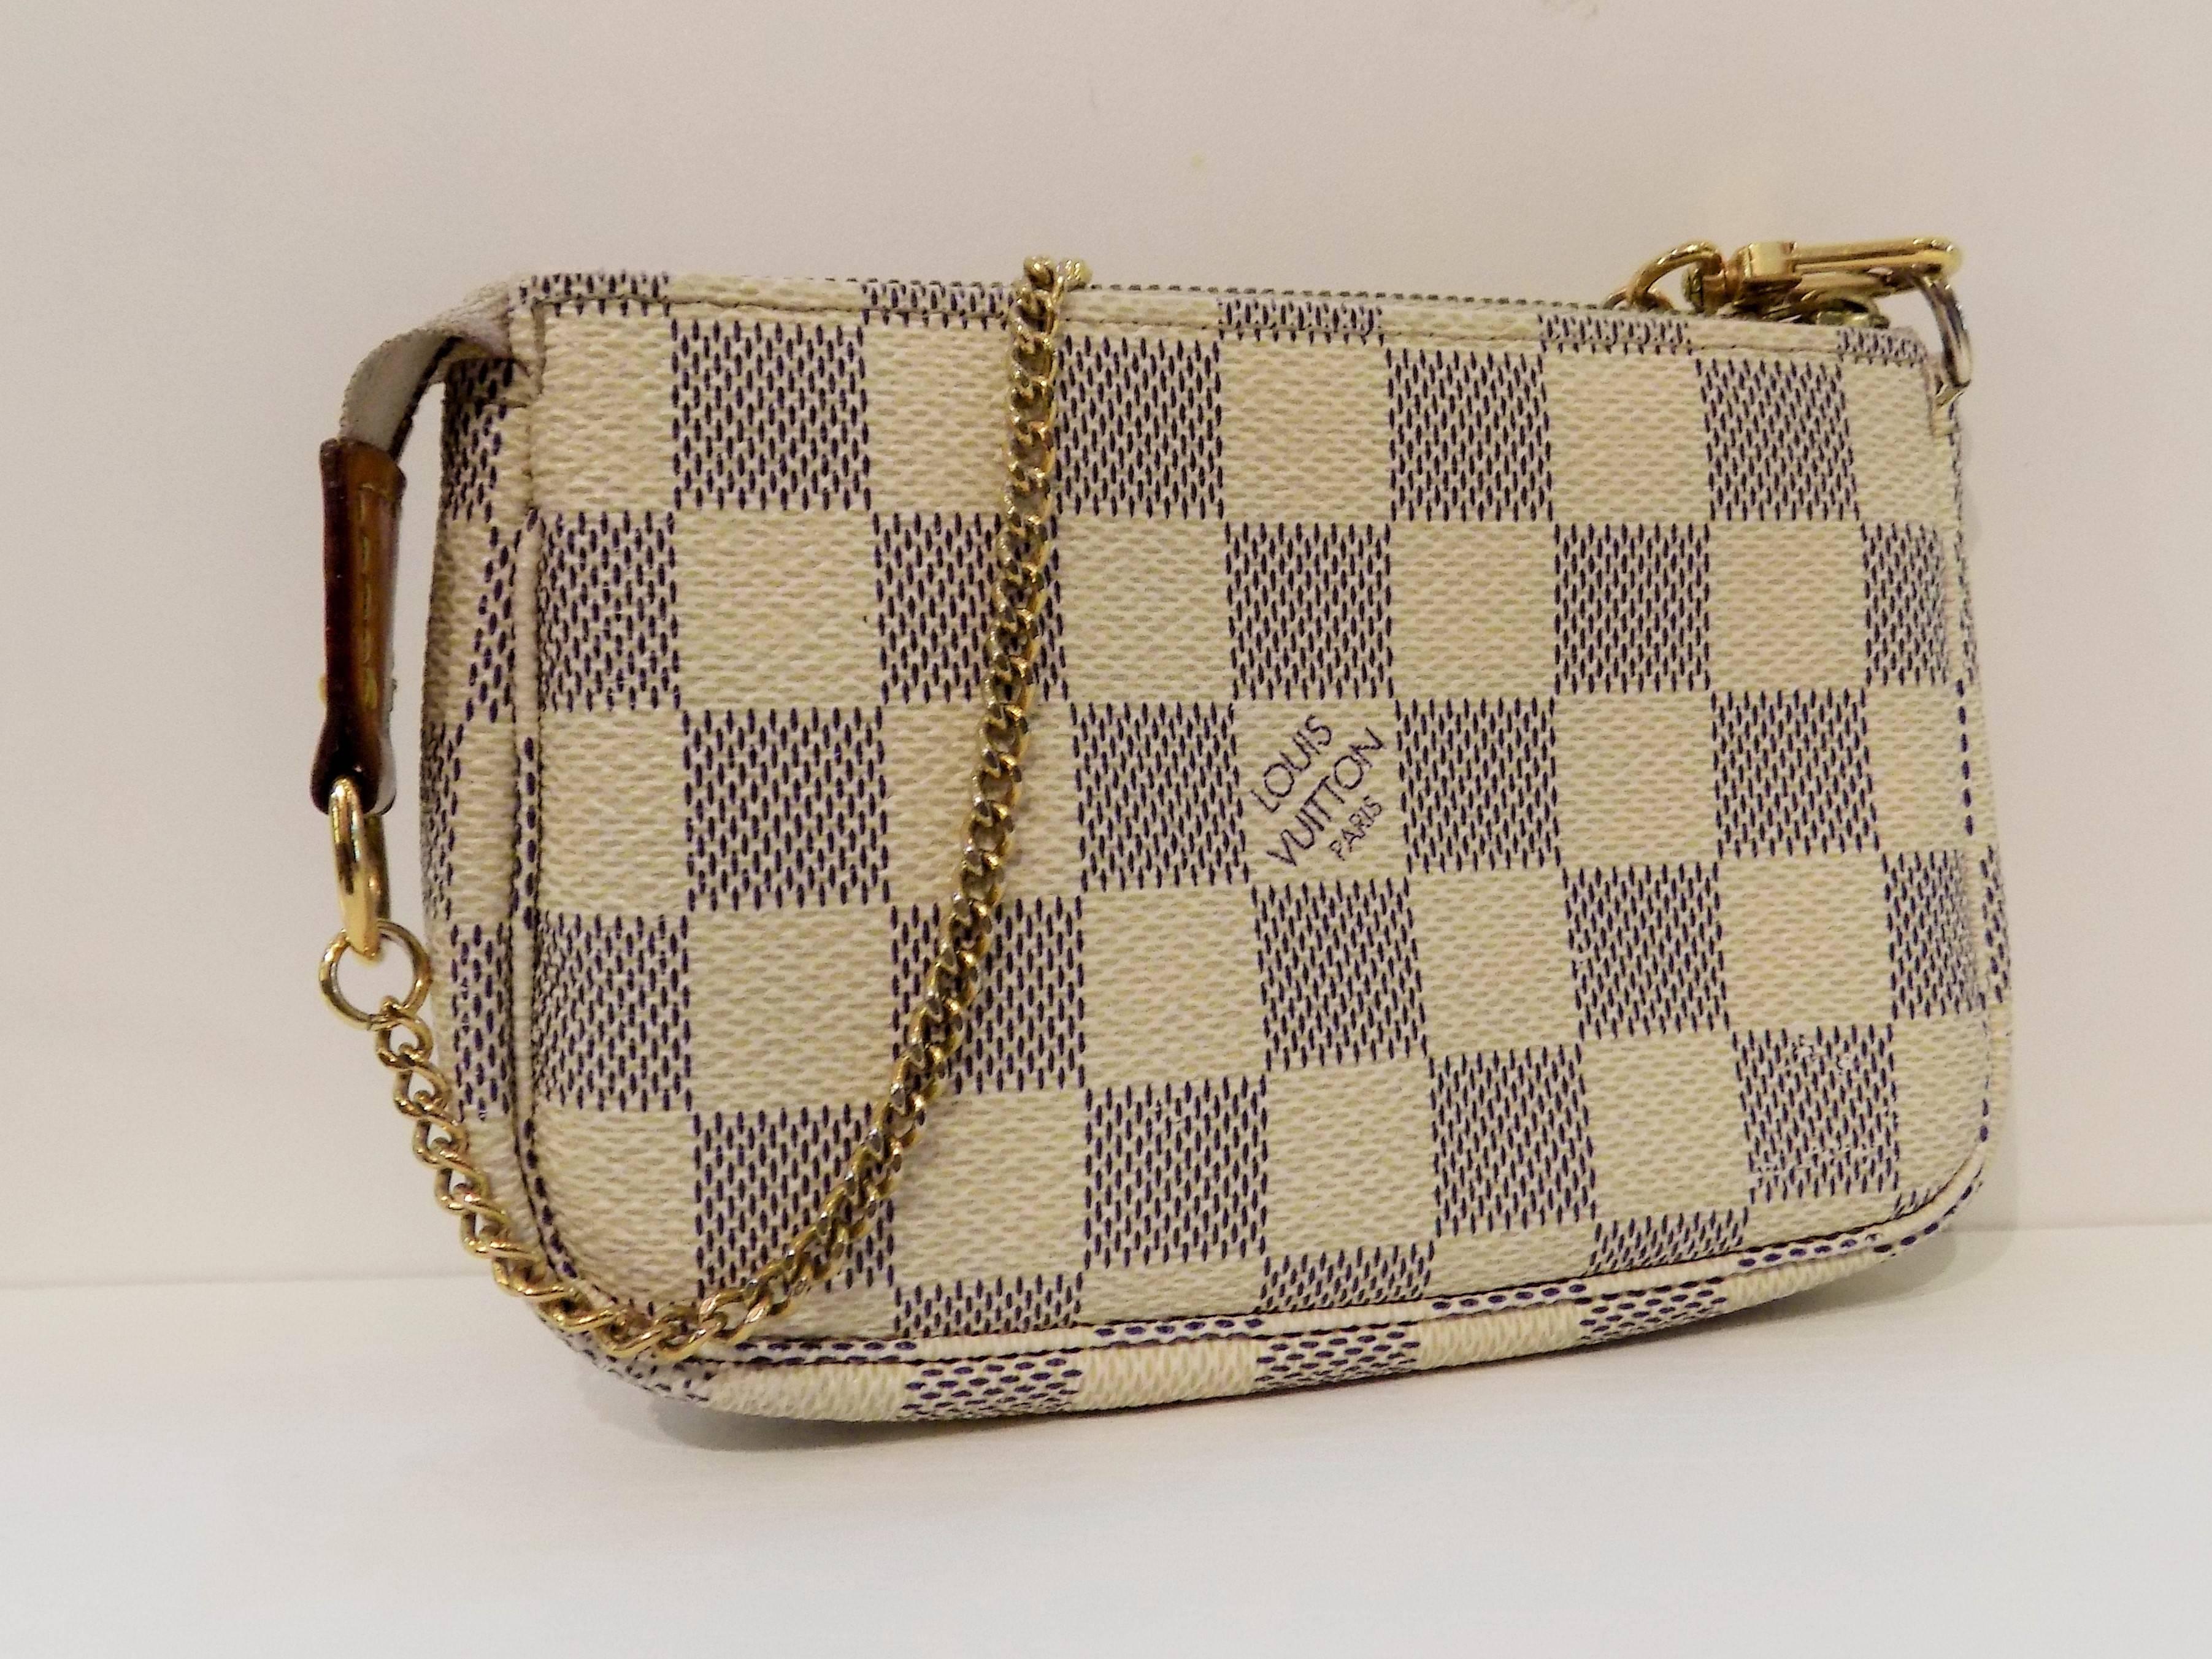 Louis Vuitton Damier Azur Pochette
Whether it is clipped to another bag or carried independently, the Mini Pochette Accessoires in striking Damier canvas is a playful addition to any wardrobe.
